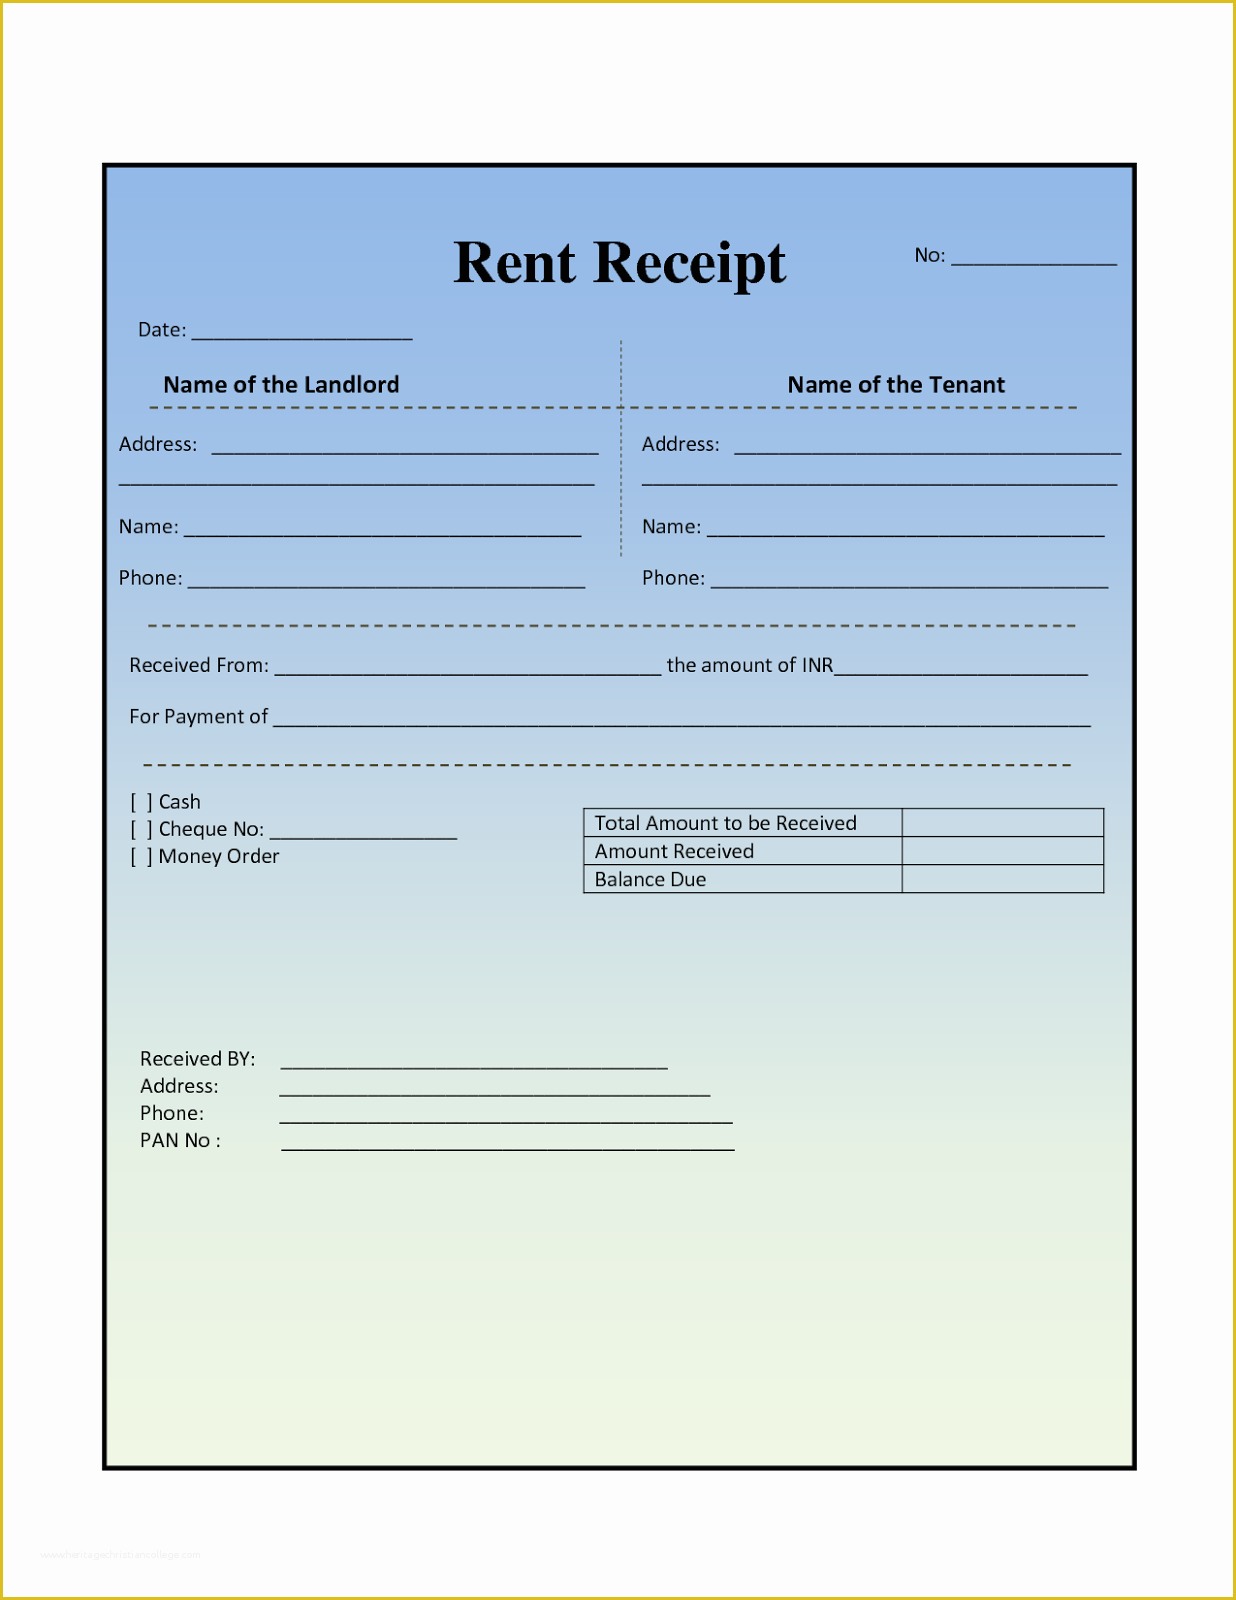 Free Rent Receipt Template Excel Of House Rental Invoice Template In